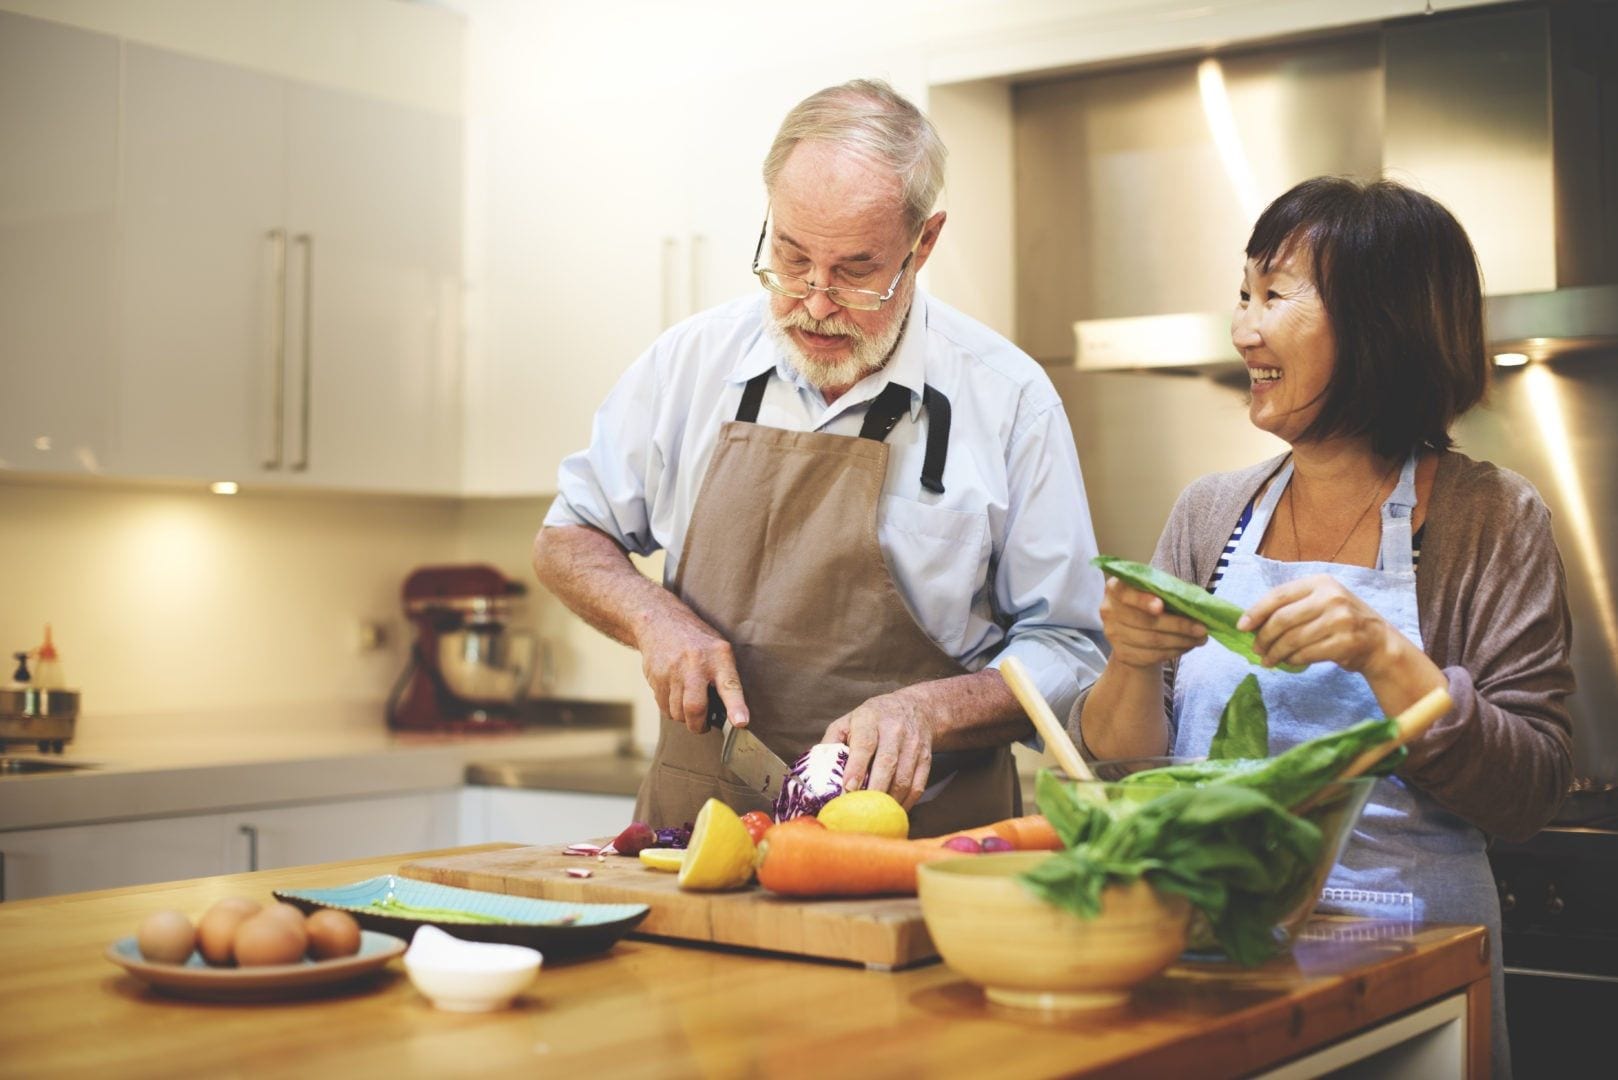 Is my senior parent eating enough? Here’s how to tell and what to do